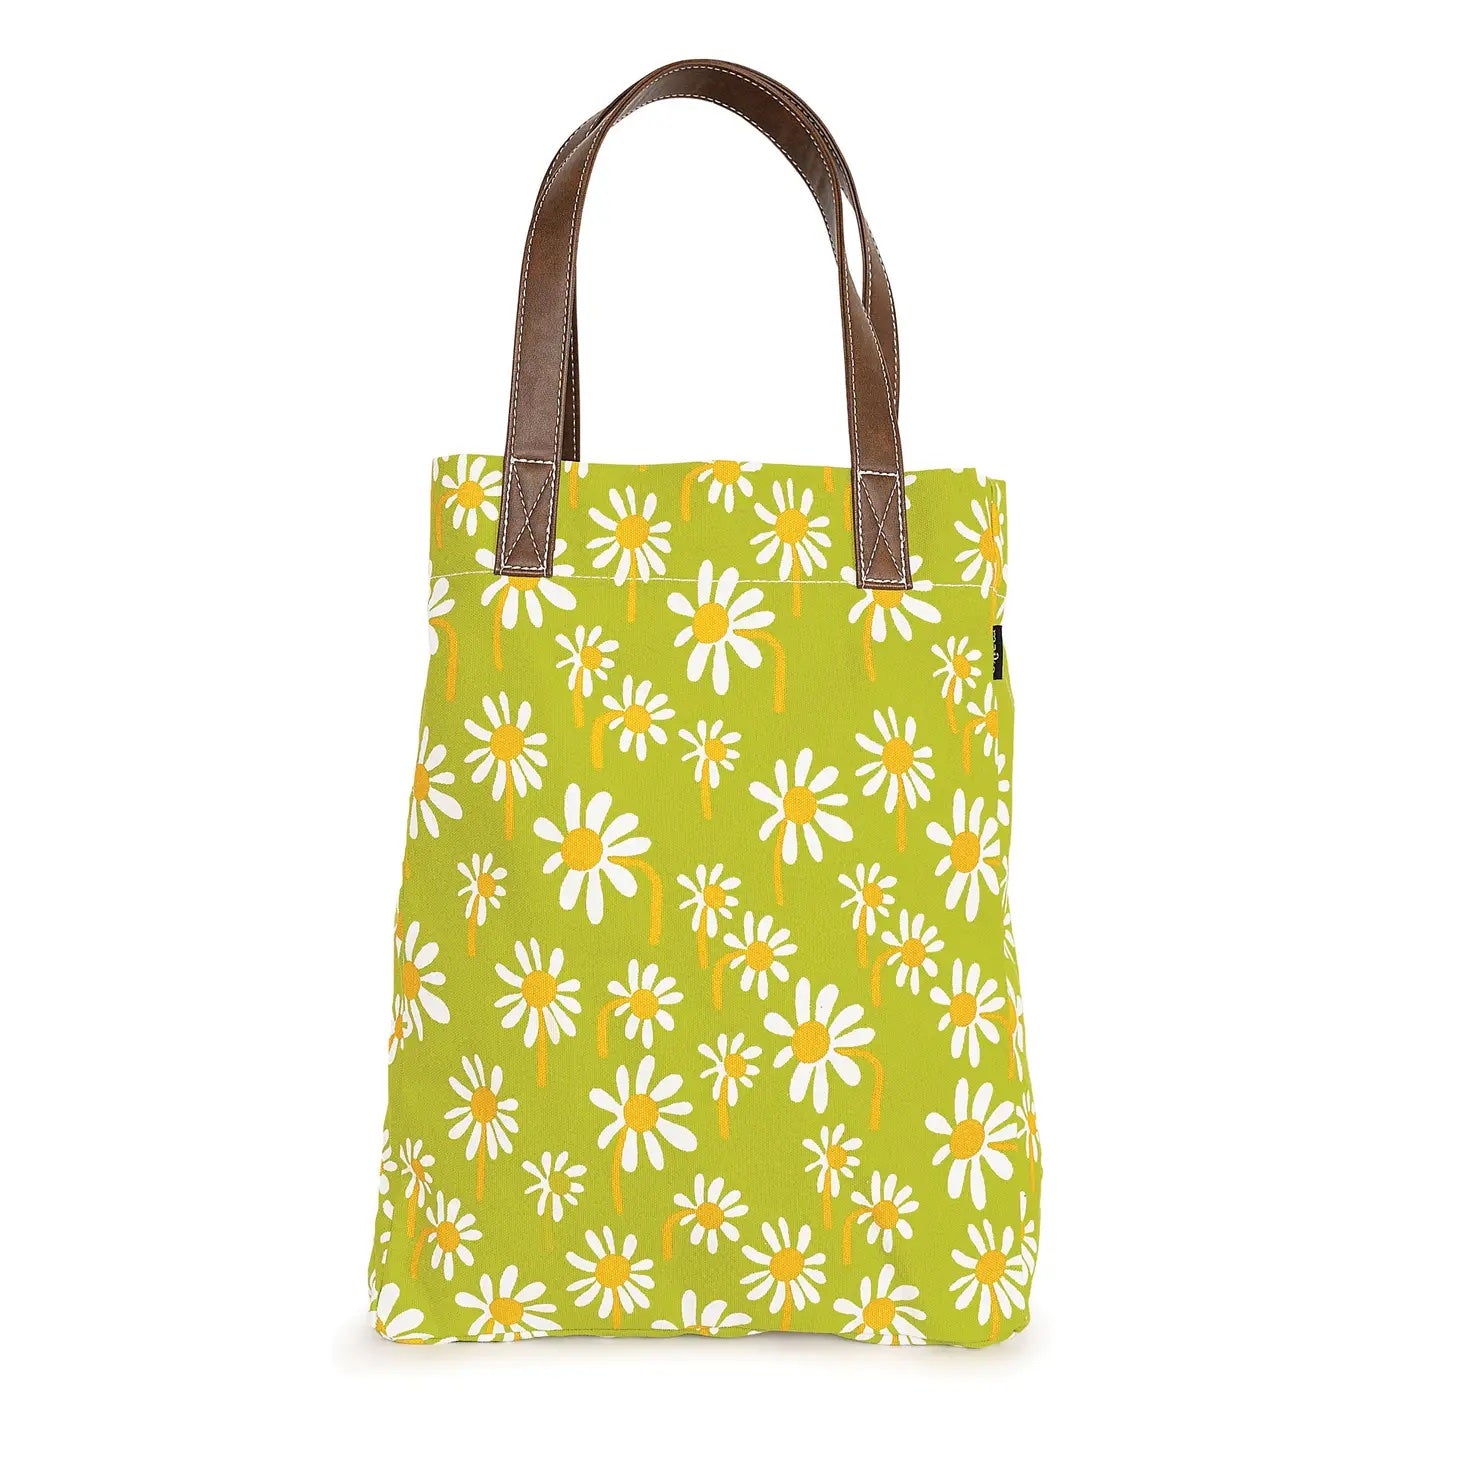 Canvas tote bags from MAIKA